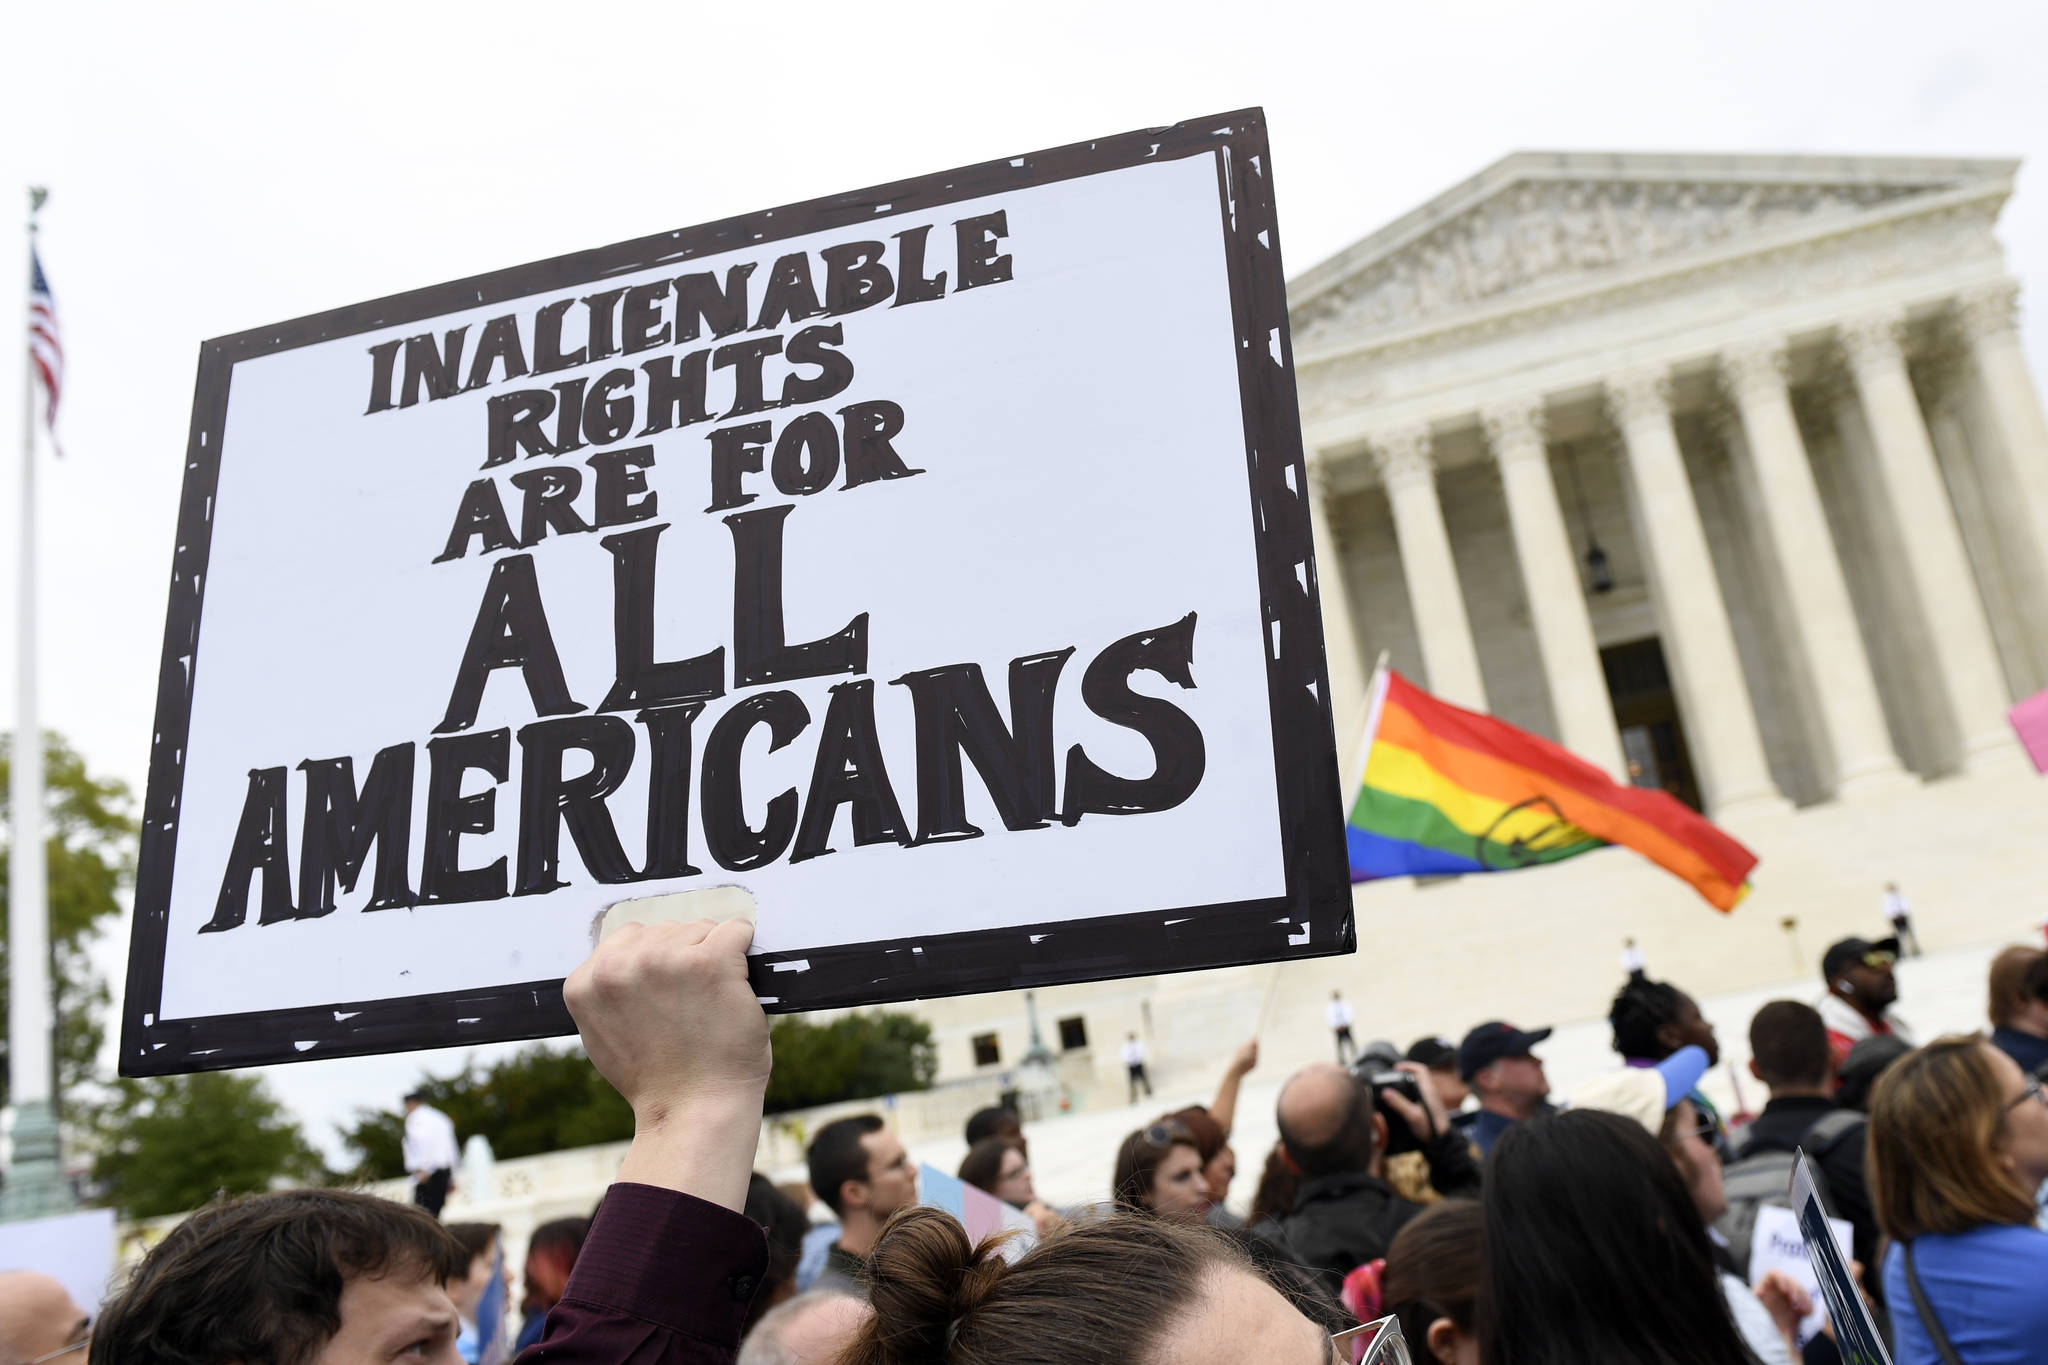 In this Oct. 8, 2019, file photo, protesters gather outside the Supreme Court in Washington where the Supreme Court is hearing arguments in the first case of LGBT rights since the retirement of Supreme Court Justice Anthony Kennedy.  As vice president in 2012, Joe Biden endeared himself to many LGBTQ Americans by endorsing same-sex marriage even before his boss, President Barack Obama. Now, as president-elect, Biden is making sweeping promises to LGBTQ activists, proposing to carry out virtually every major proposal on their wish lists.   (AP Photo / Susan Walsh, File)